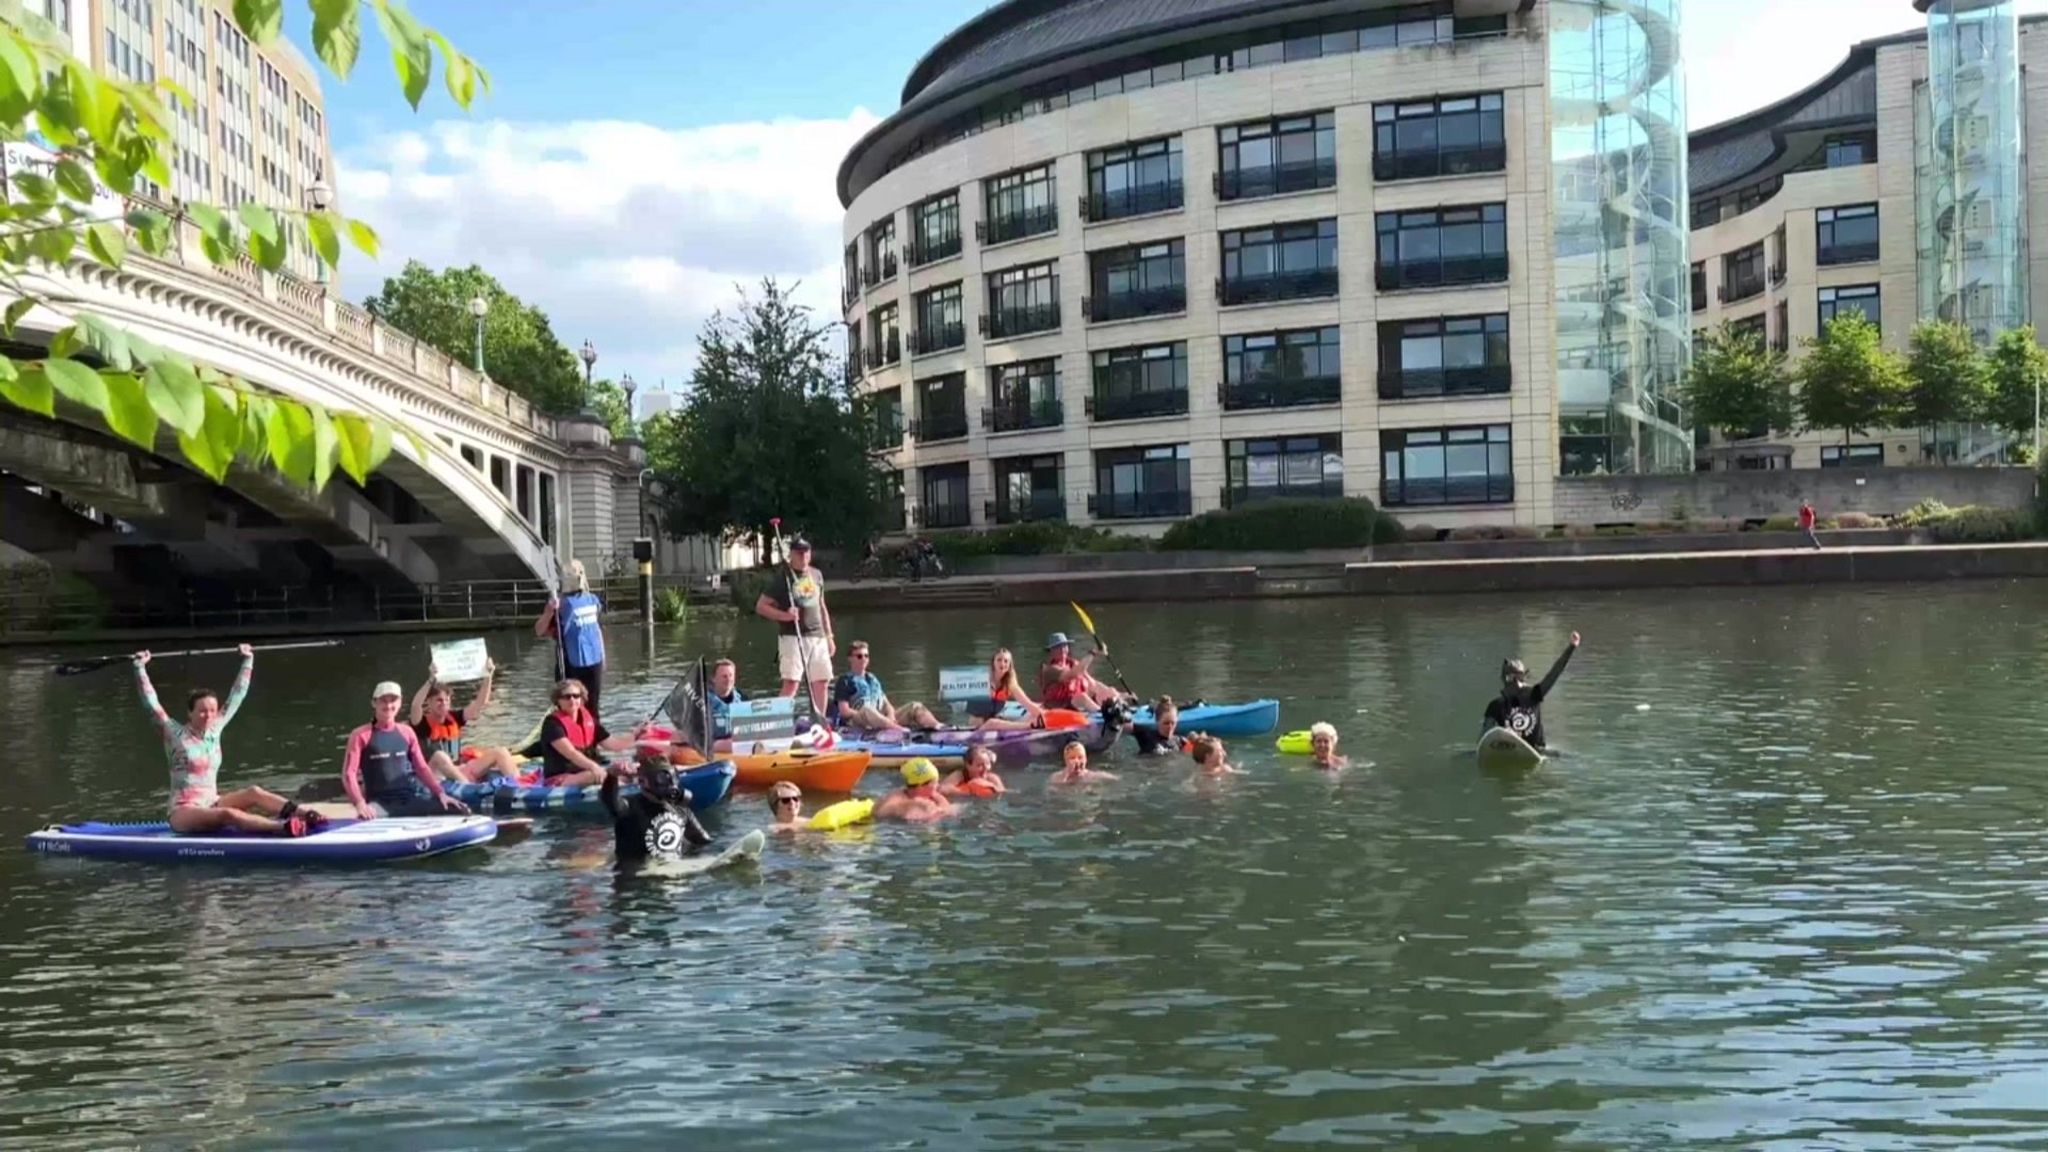 Protesters floating on river thames some on paddle boards and some just bobbing in the water